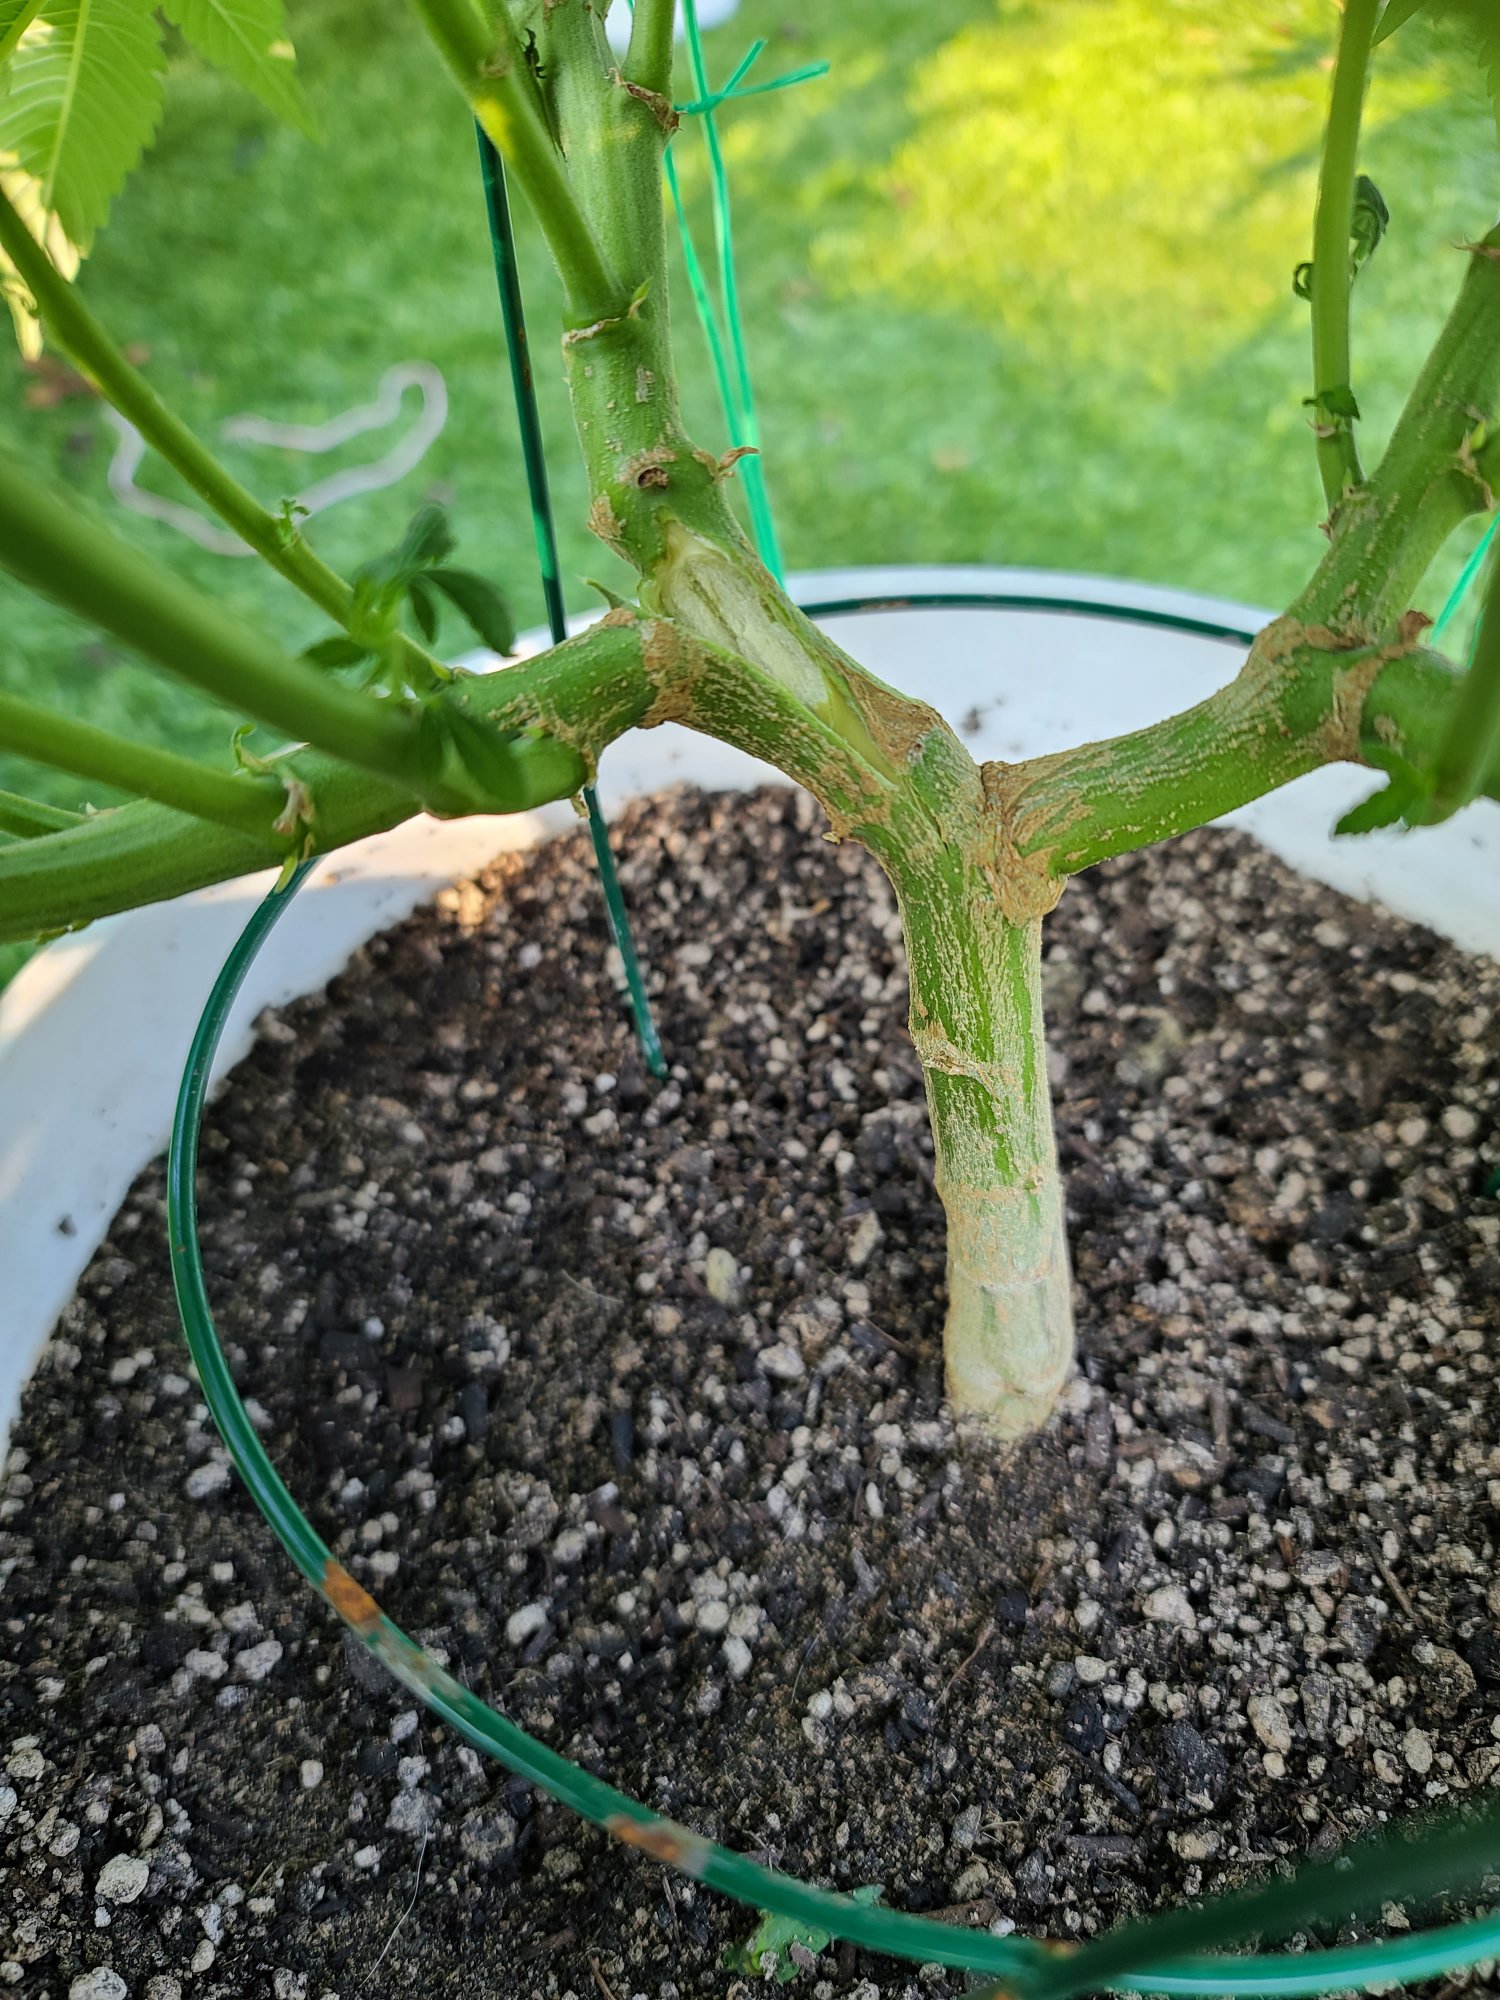 Something is destroying my plants